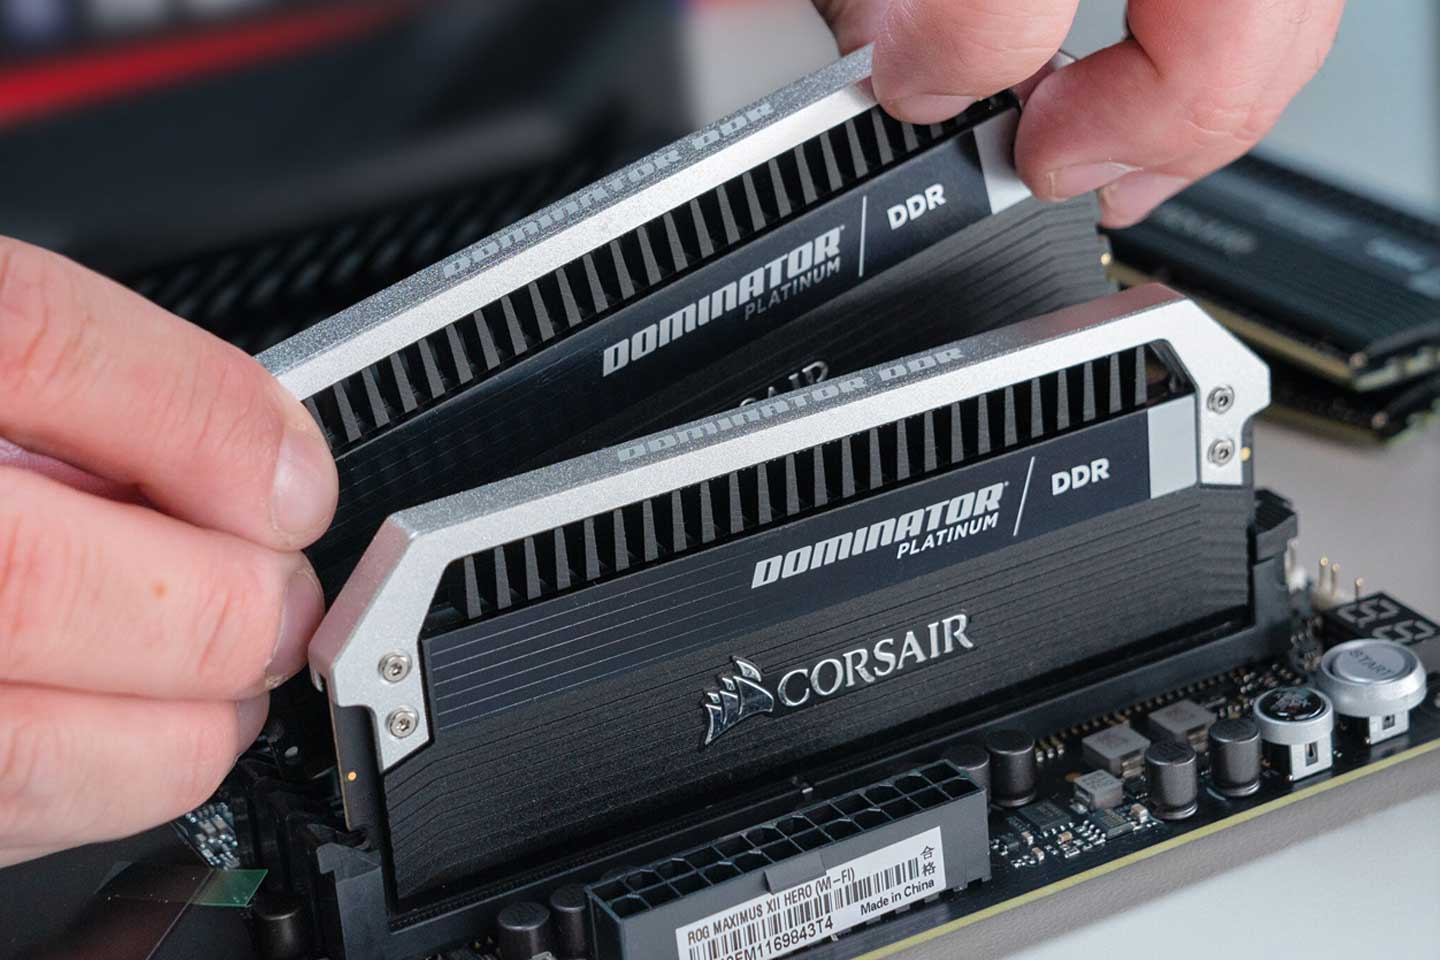 Ballistix memory being placed on motherboard